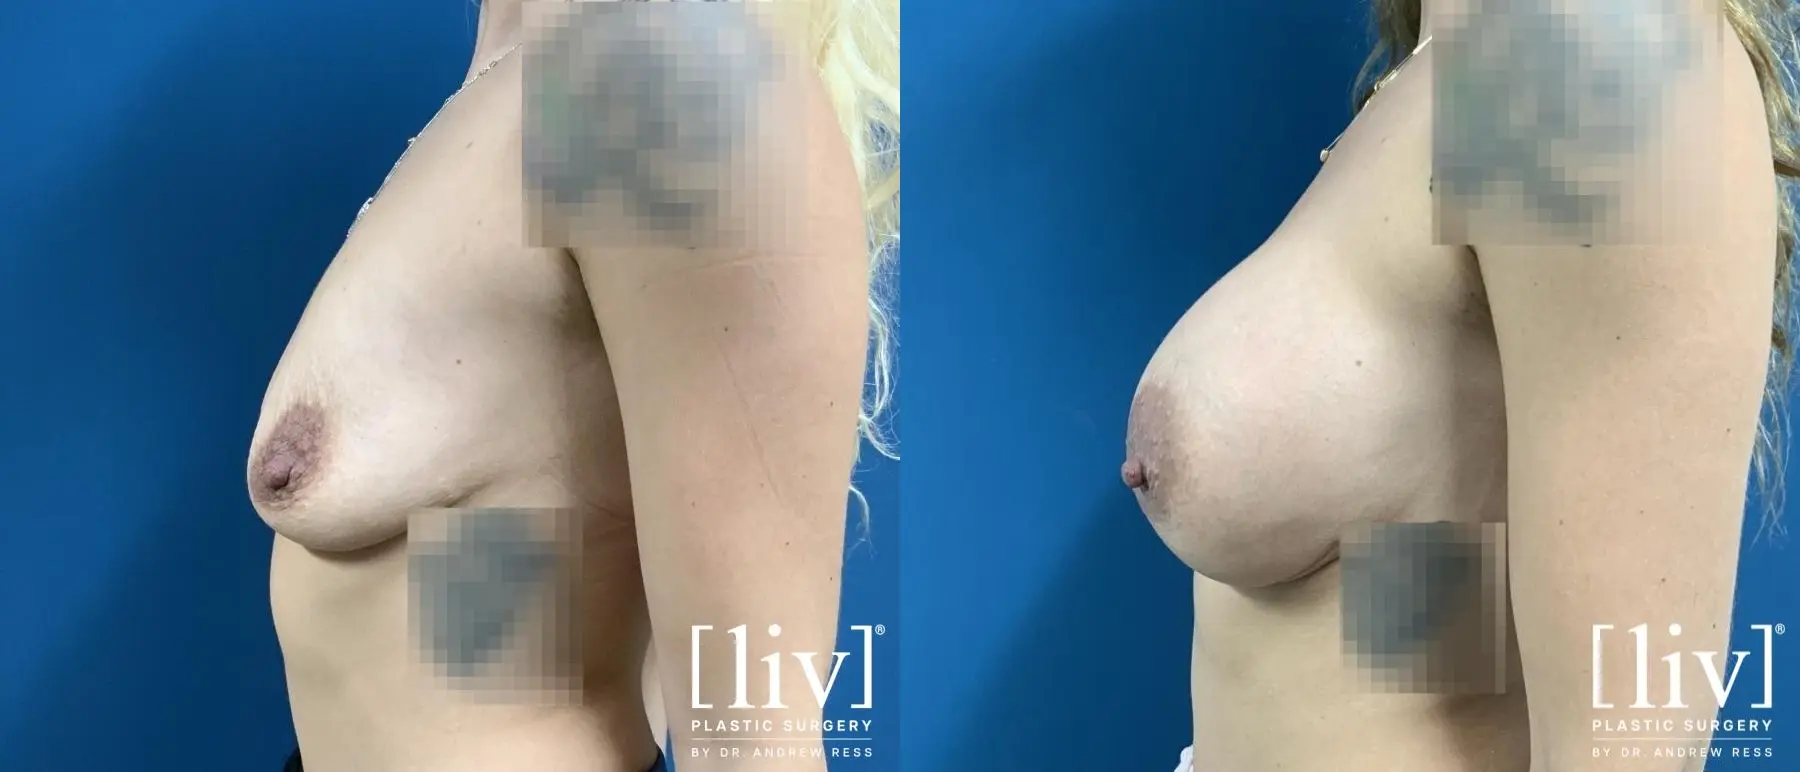 Breast Augmentation: Patient 5 - Before and After 3